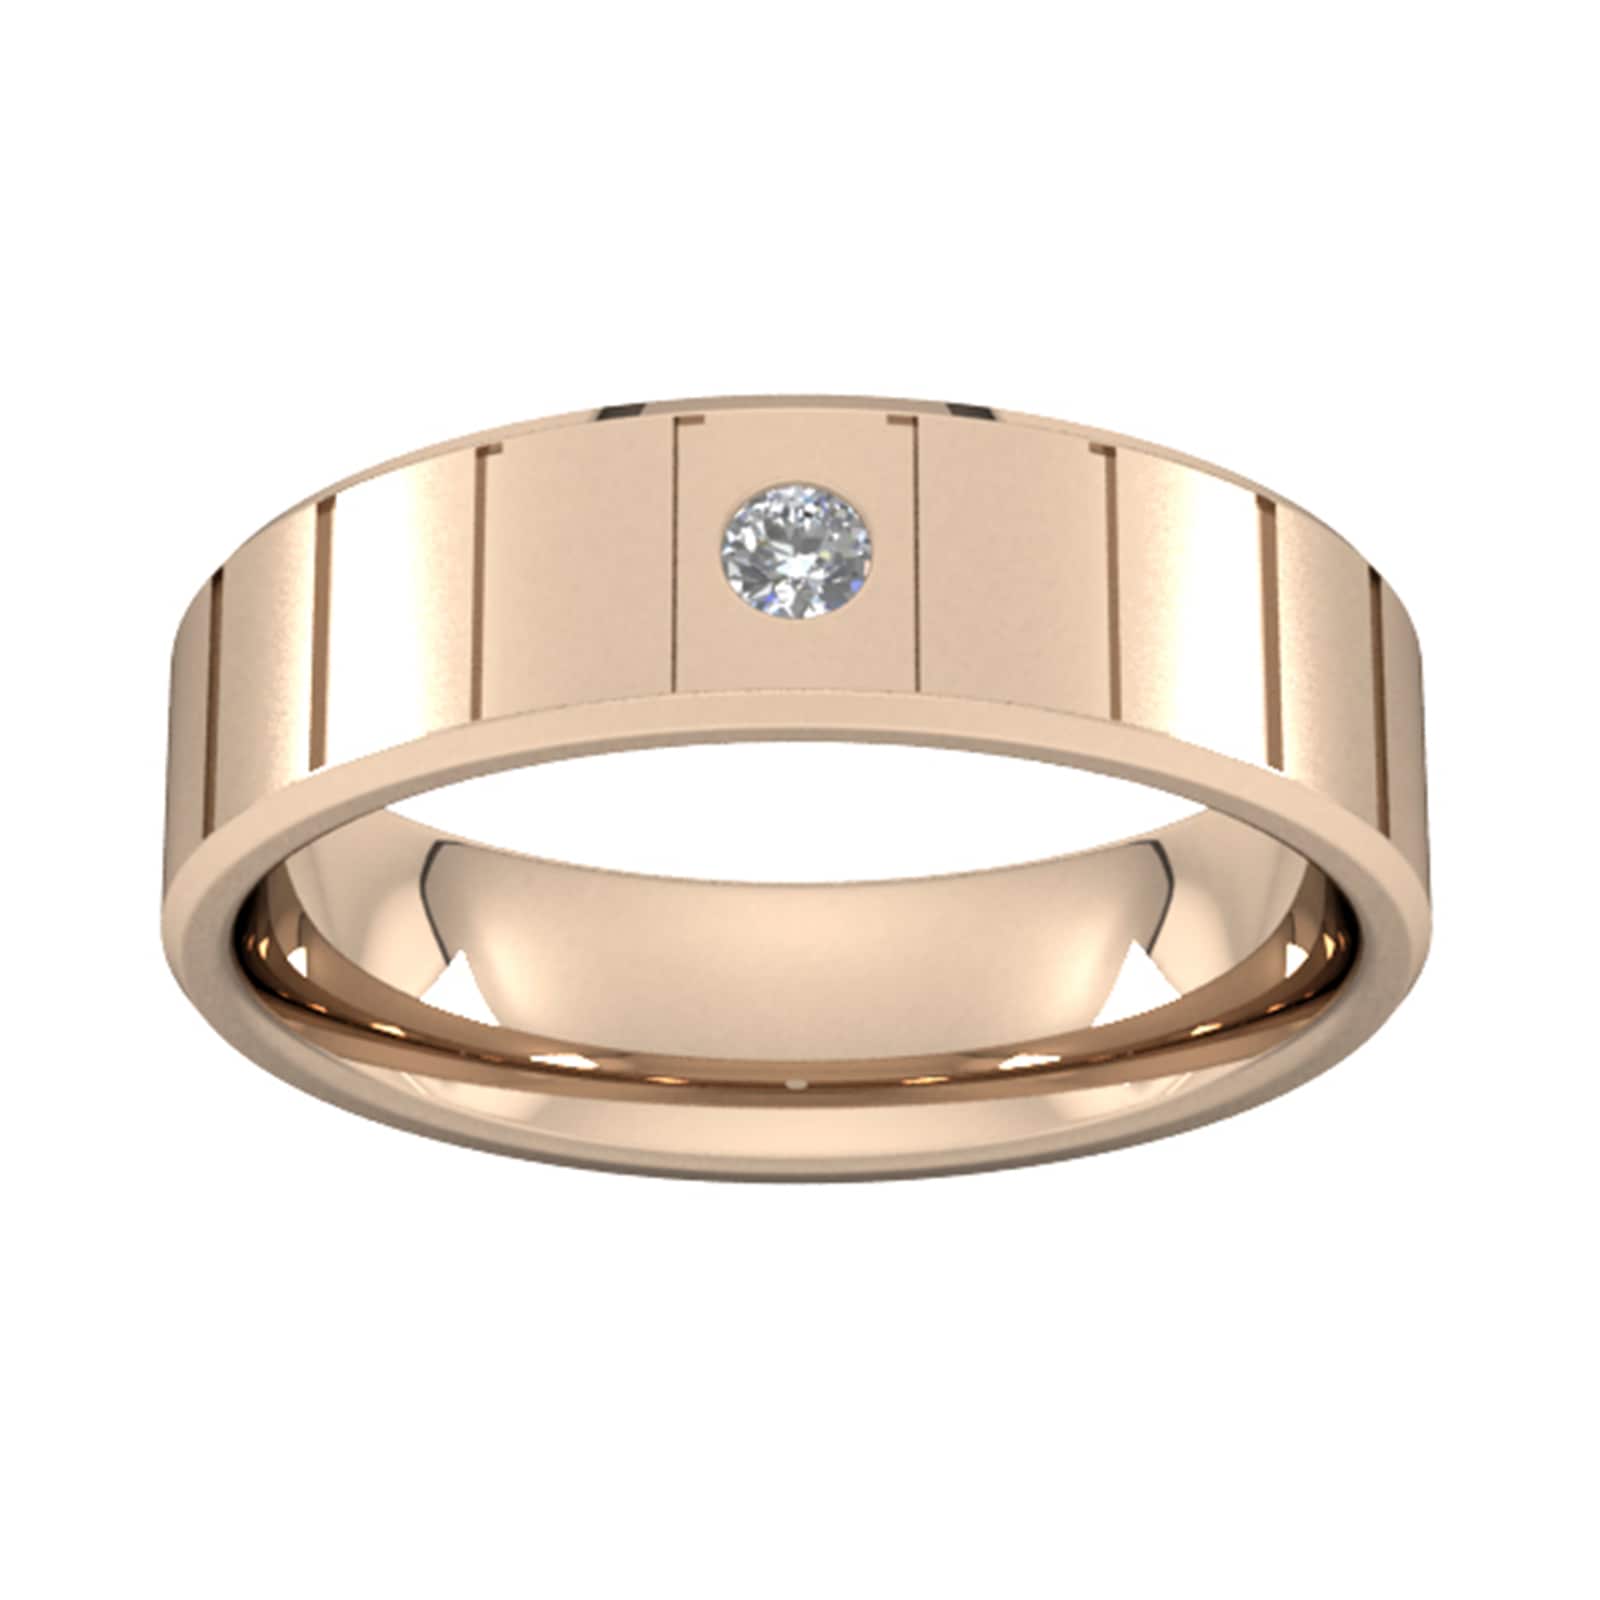 6mm Brilliant Cut Diamond Set With Vertical Lines Wedding Ring In 9 Carat Rose Gold - Ring Size X